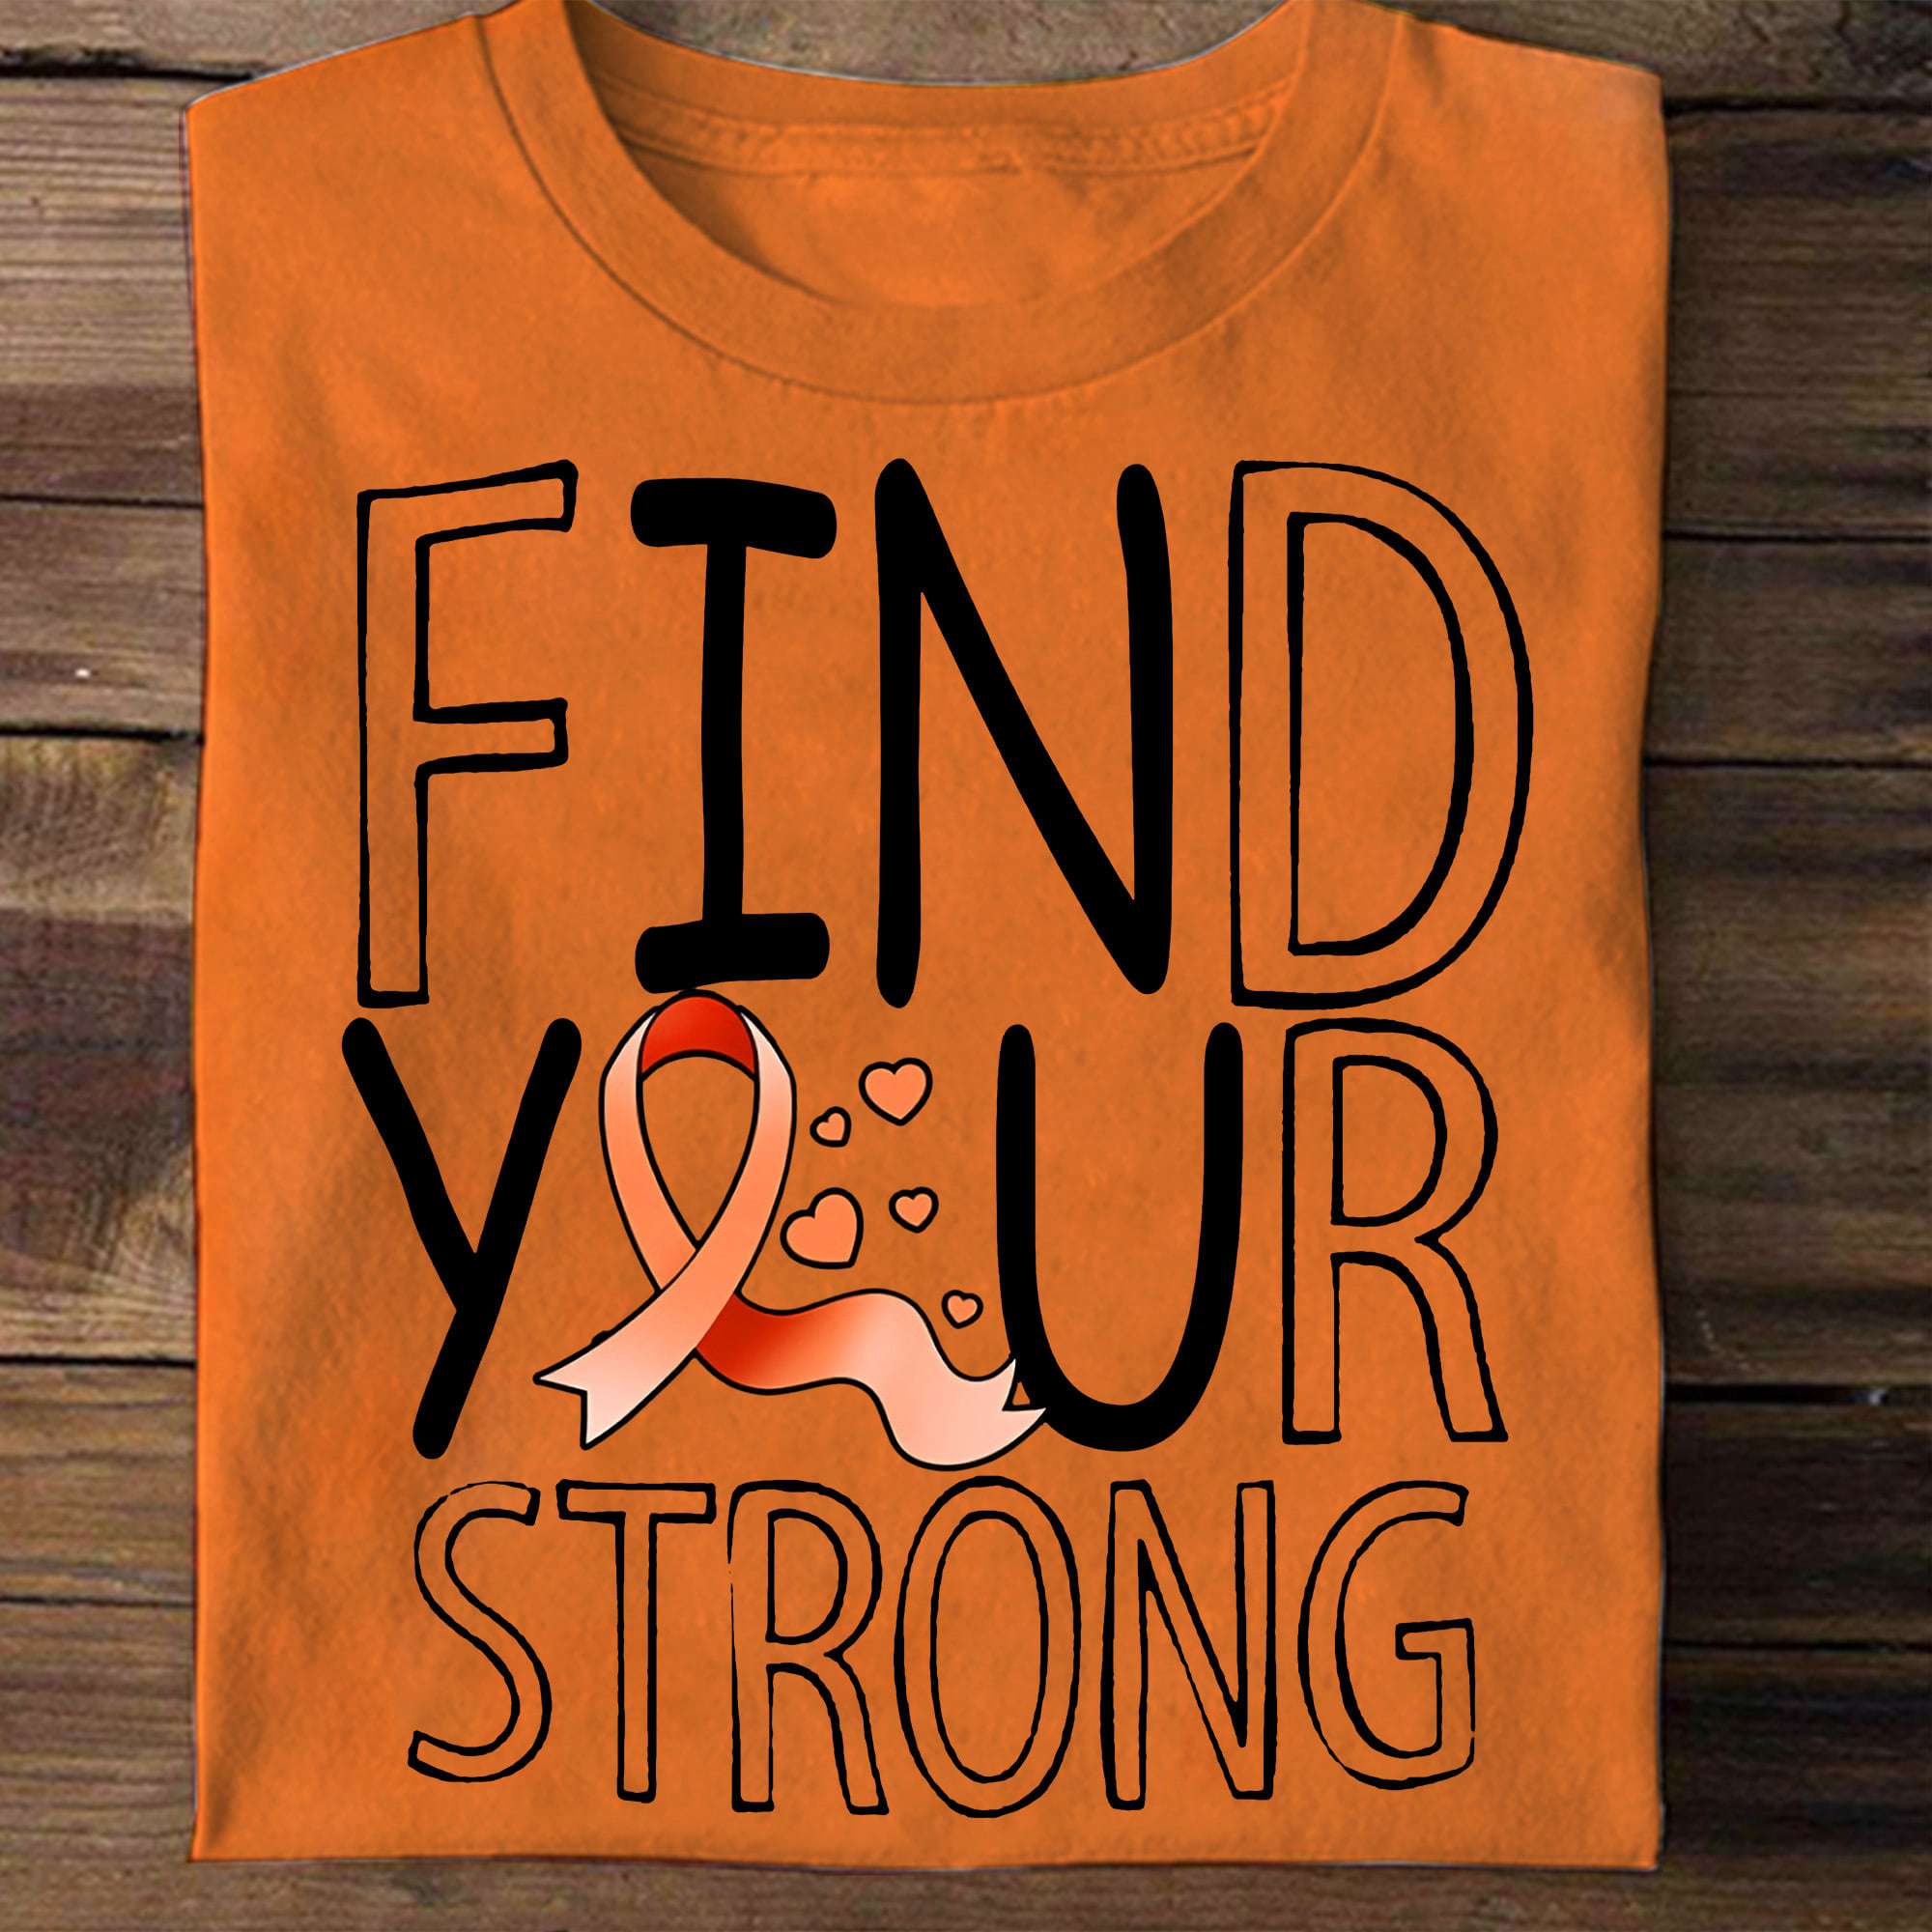 Find your strong - Cancer awareness, cancer ribbon